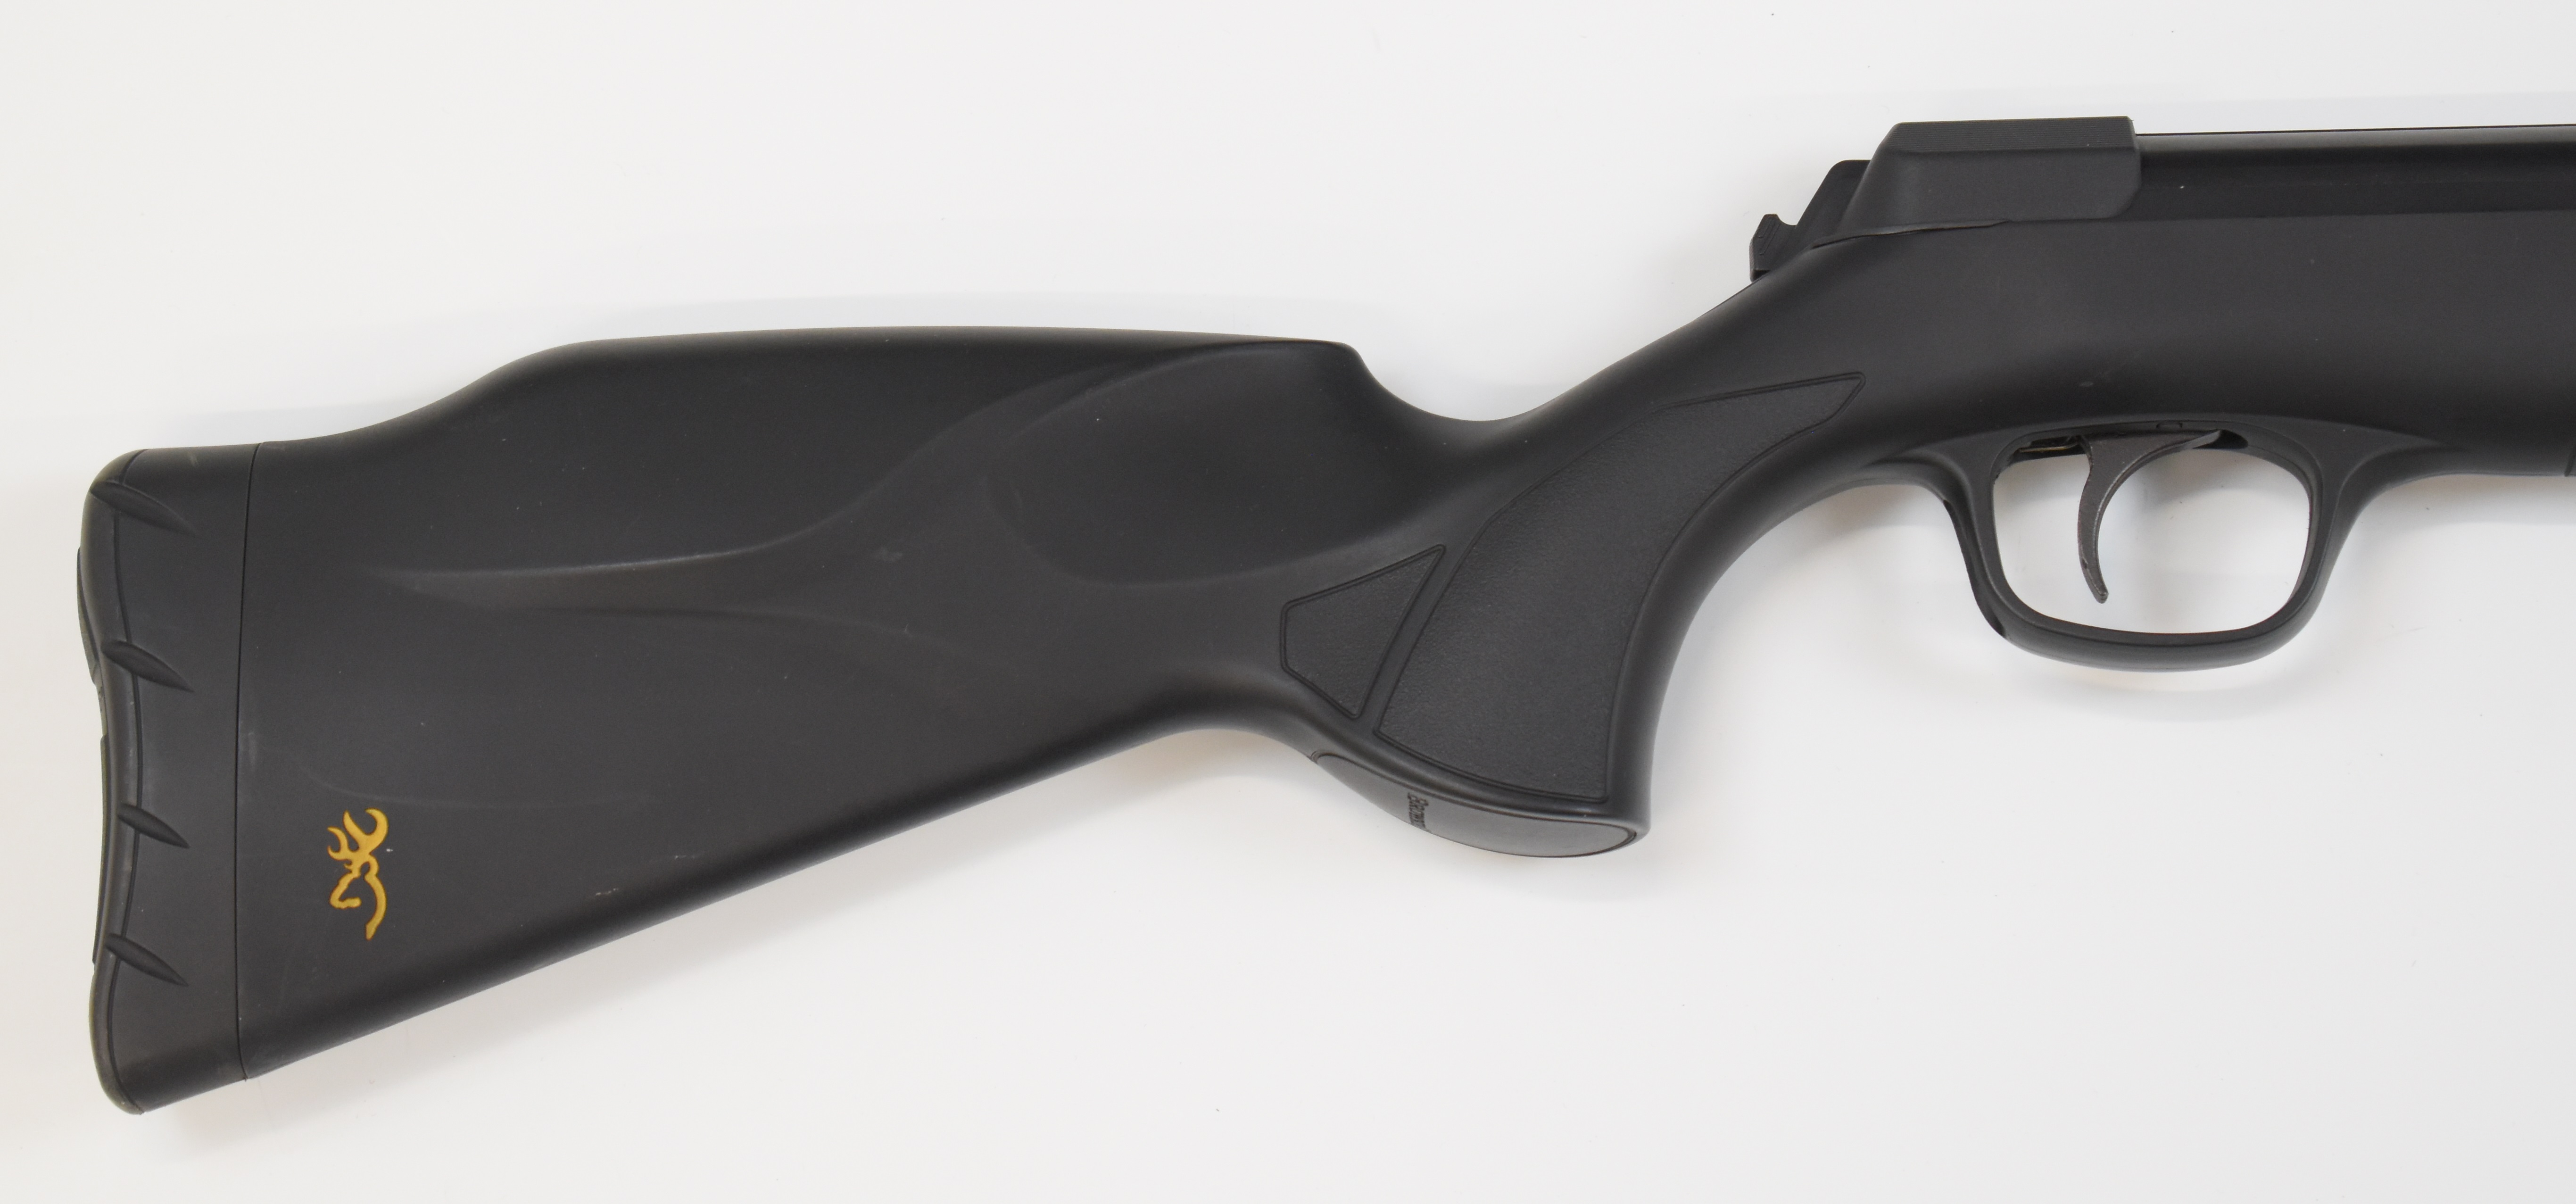 Browning X-Blade II .22 air rifle with composite stock, textured semi-pistol grip and forend and - Image 3 of 10